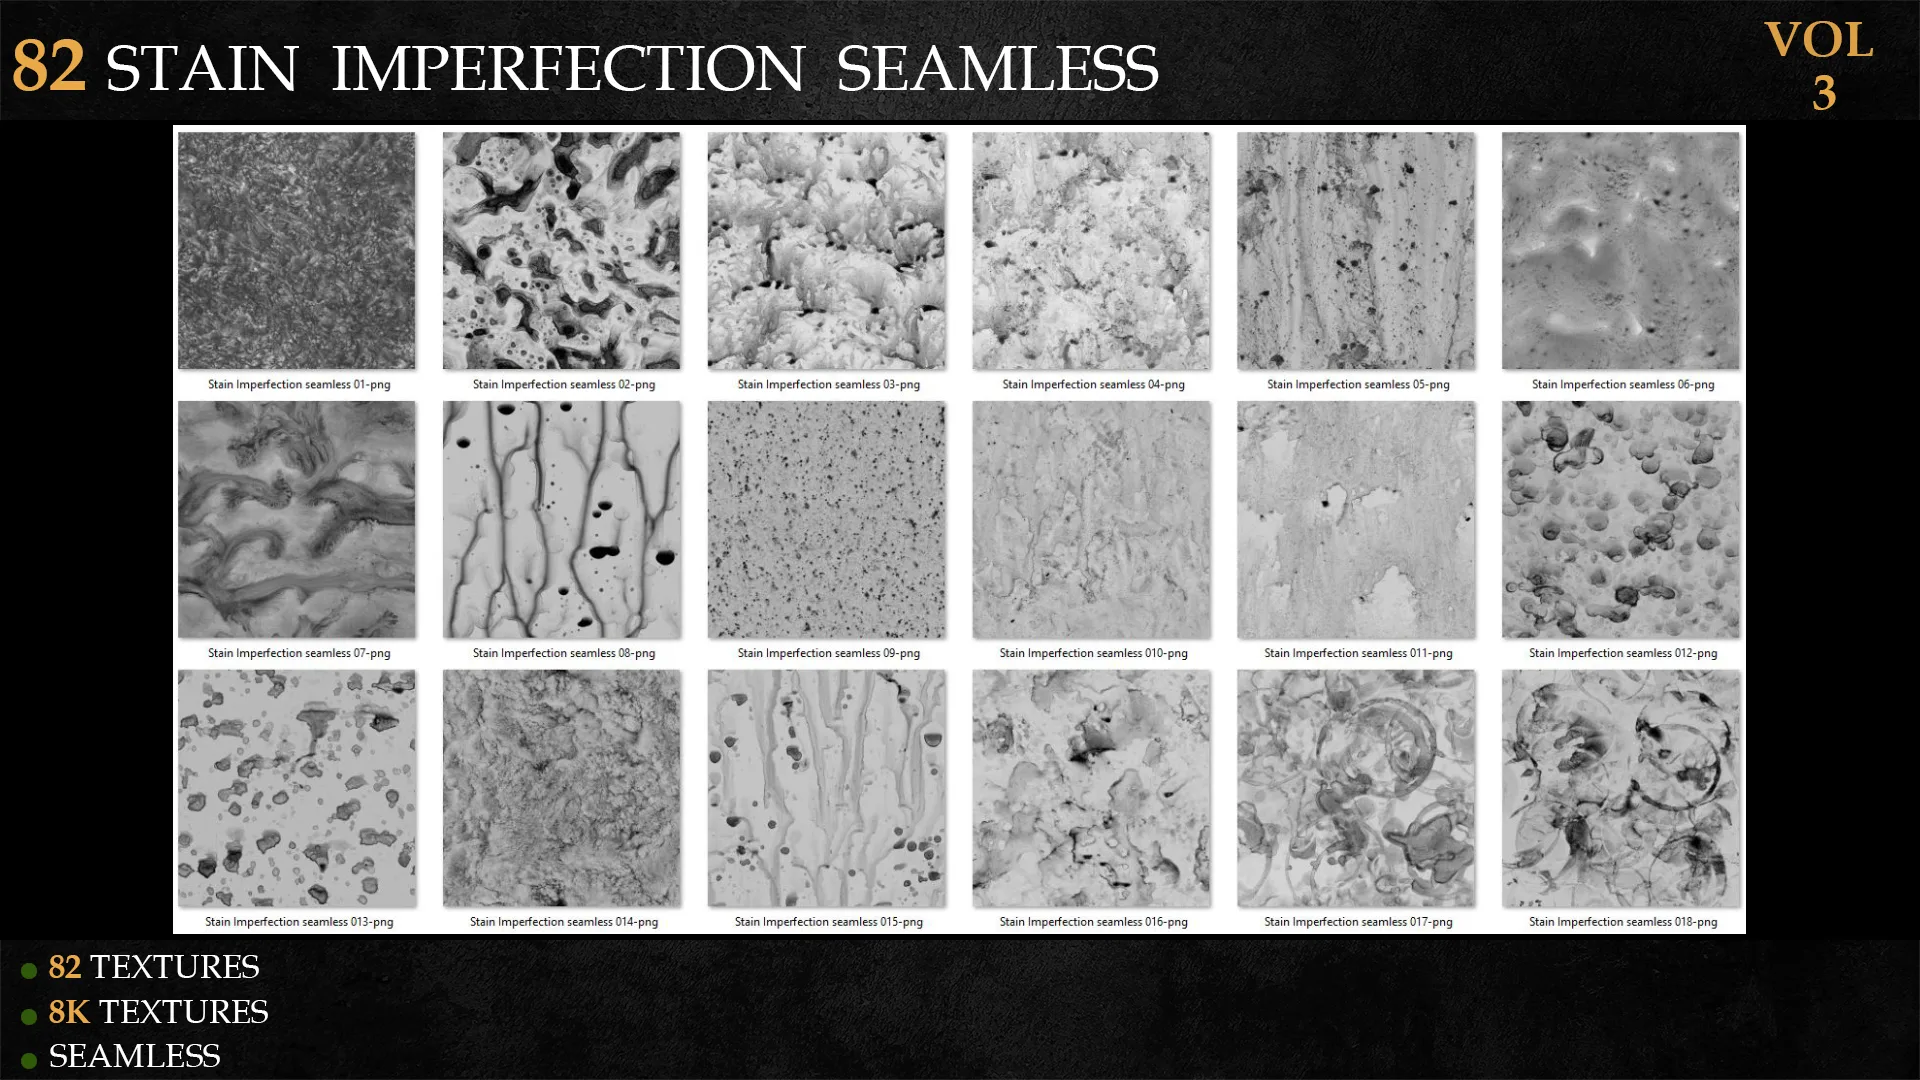 82 Stain Imperfection seamless -vol3